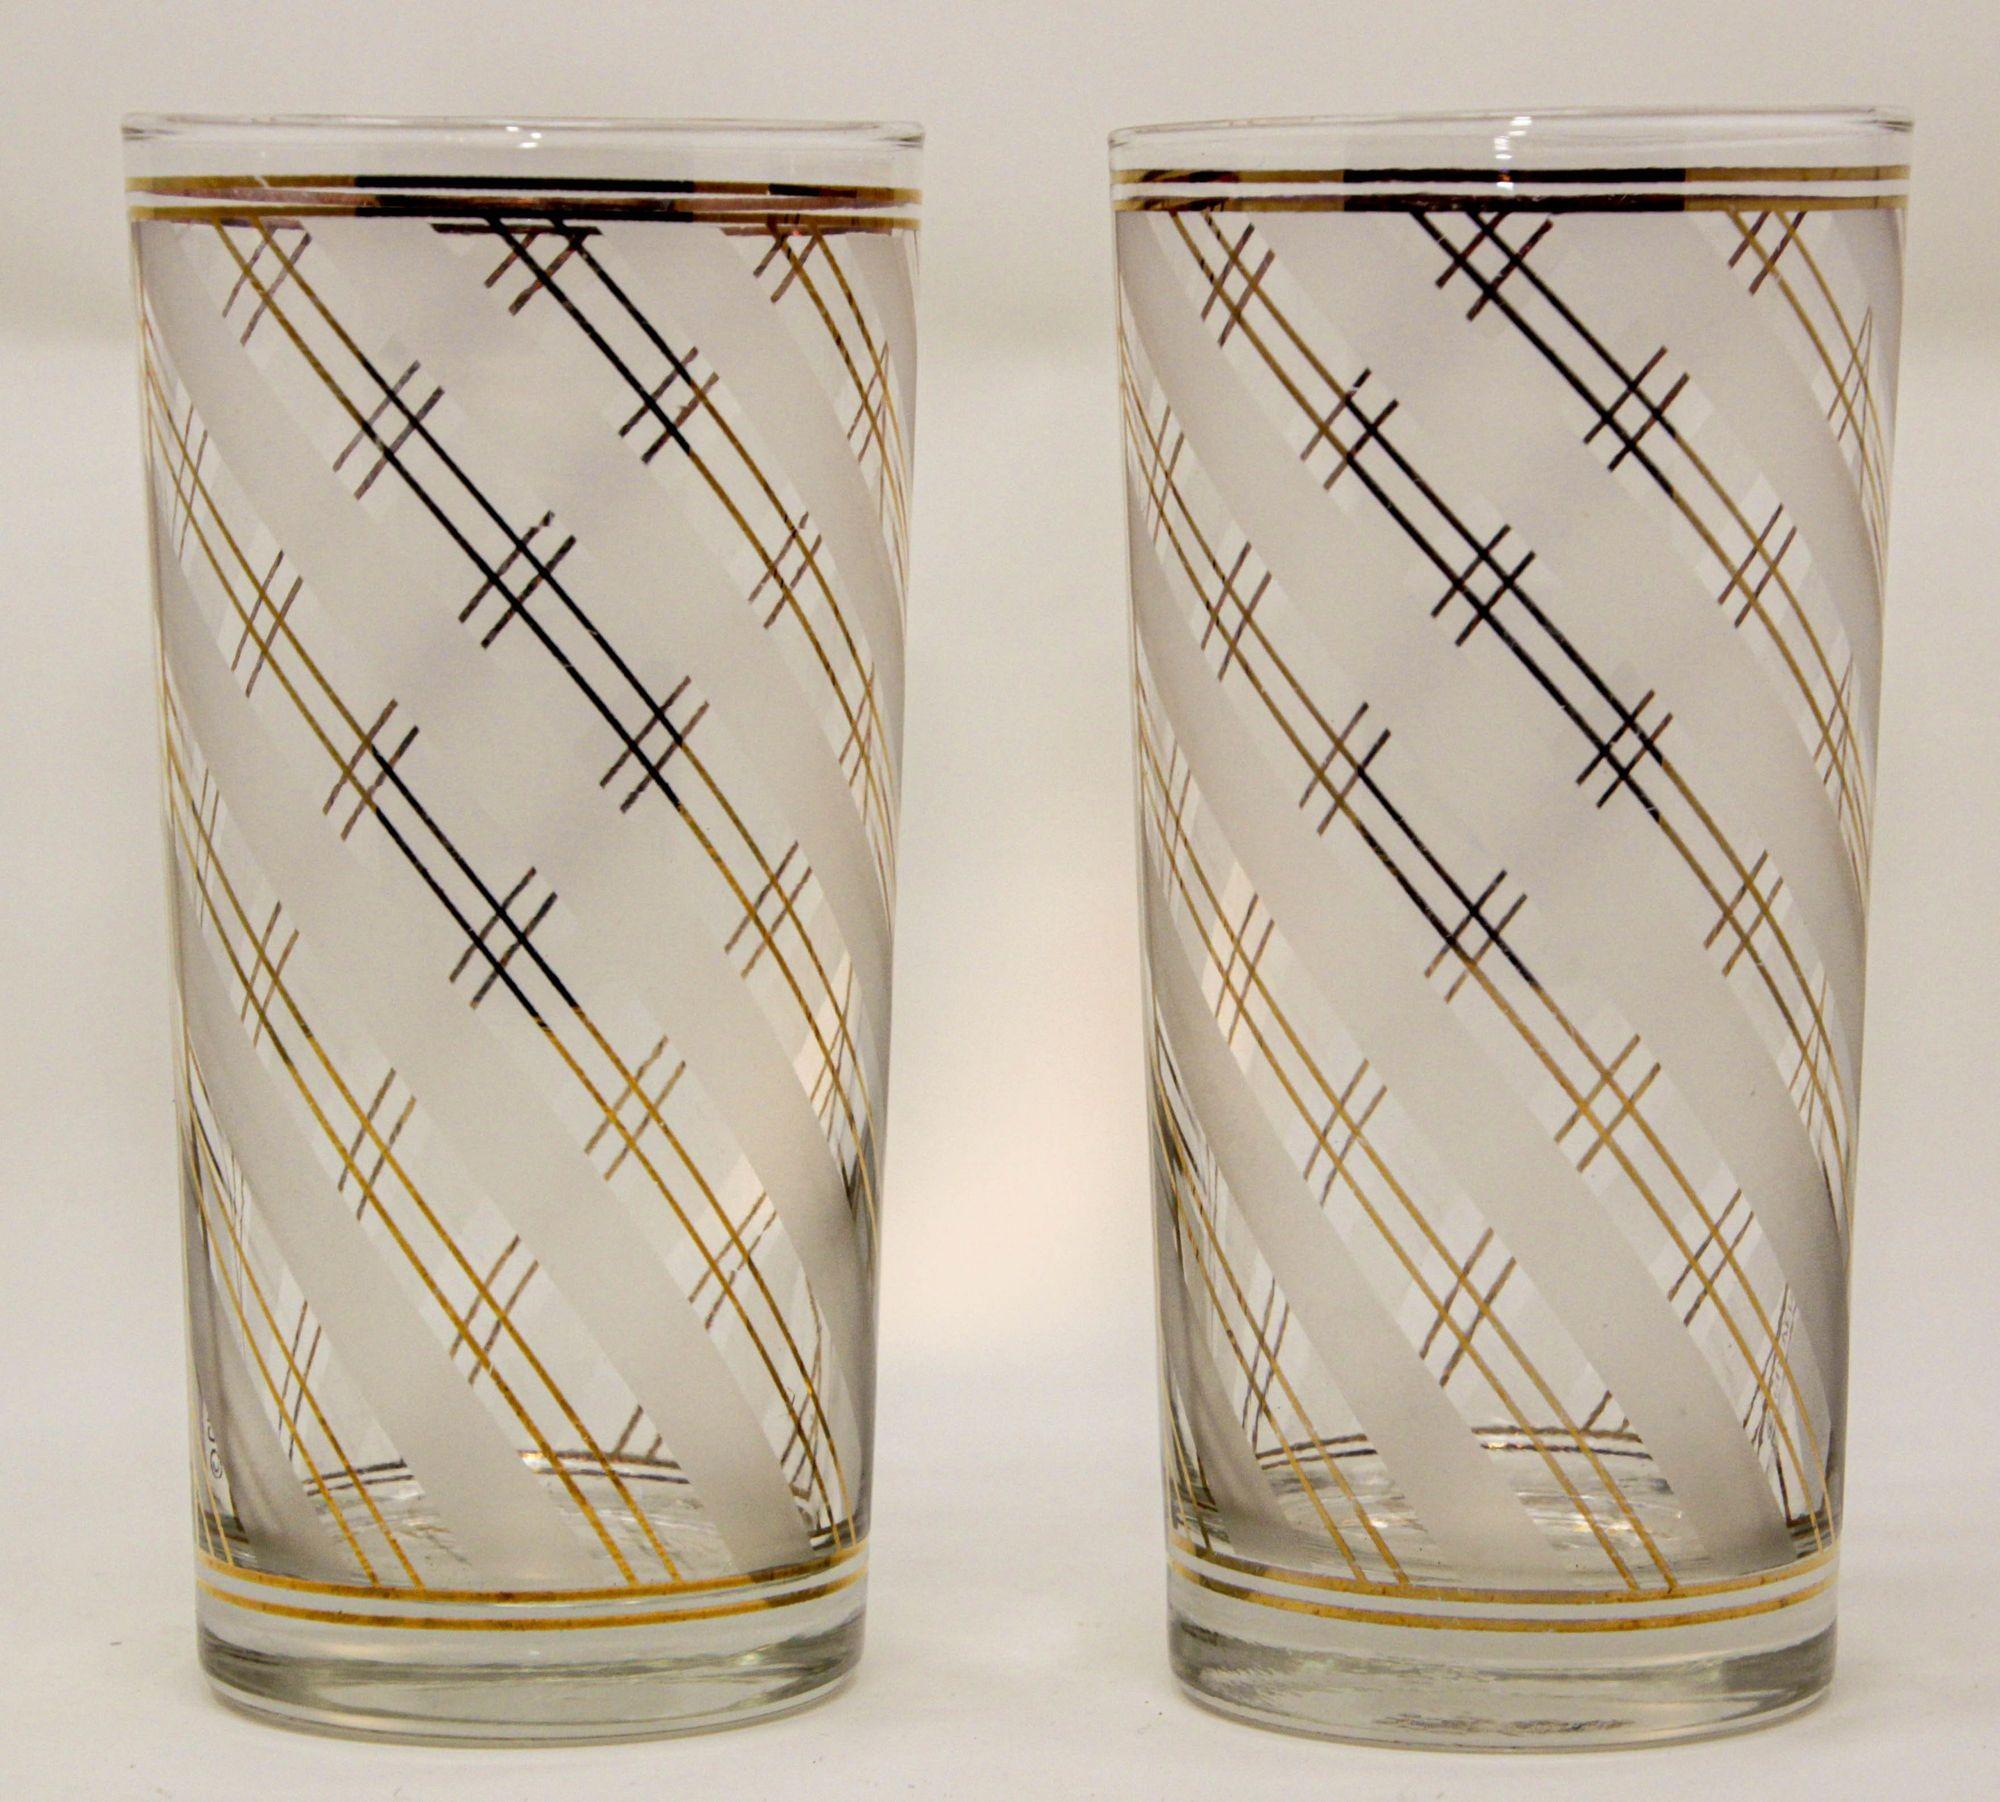 Vintage Culver striped gold line barware high ball glasses.
Gold Striped Set of 2 Signature Culver glasses Art Deco style gold and frosted striped tumblers.
Wonderful set of 2 Art Deco stylized tumblers. 
Vintage Culver Gold and frosted Chevron